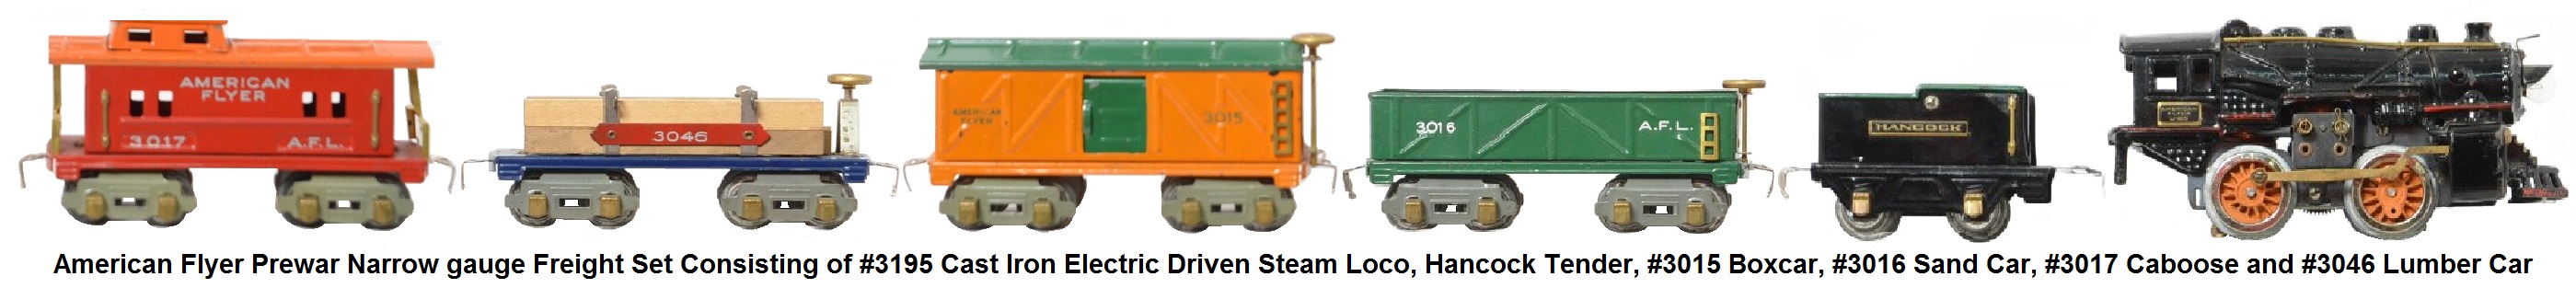 American Flyer 'O' gauge freight set consisting of #3195 cast iron electric steam outline locomotive, Hancock tender, #3015 boxcar, #3016 sand car, #3017 caboose and #3046 lumber car